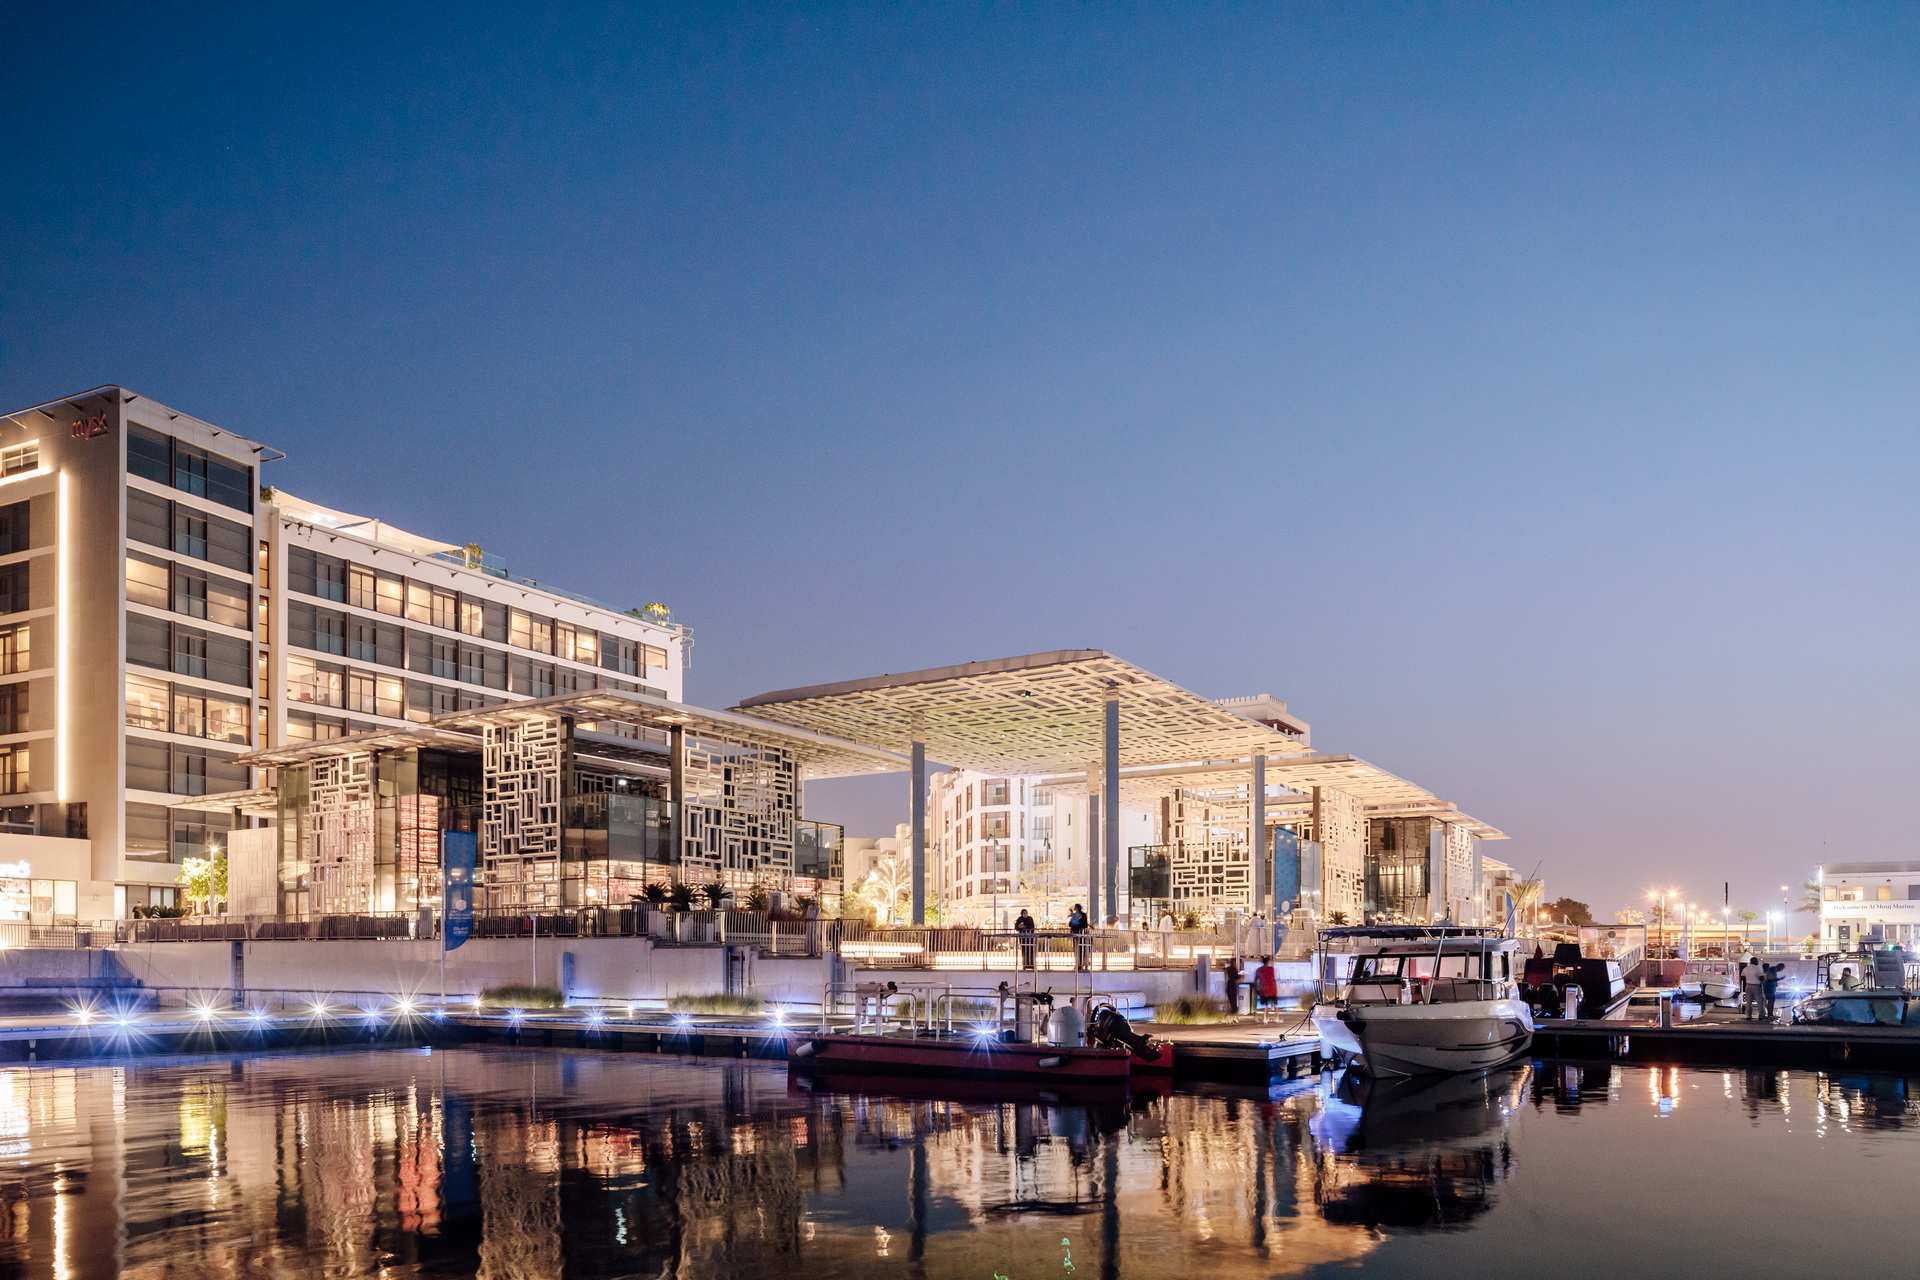 <p>Intended as a focal point for Muscat’s new Al Mouj district and a destination for the whole city, this open public space combines the geometrical formality and edge activation of classical European plazas with shading and maze-like qualities typical of Middle Eastern gathering places.</p>